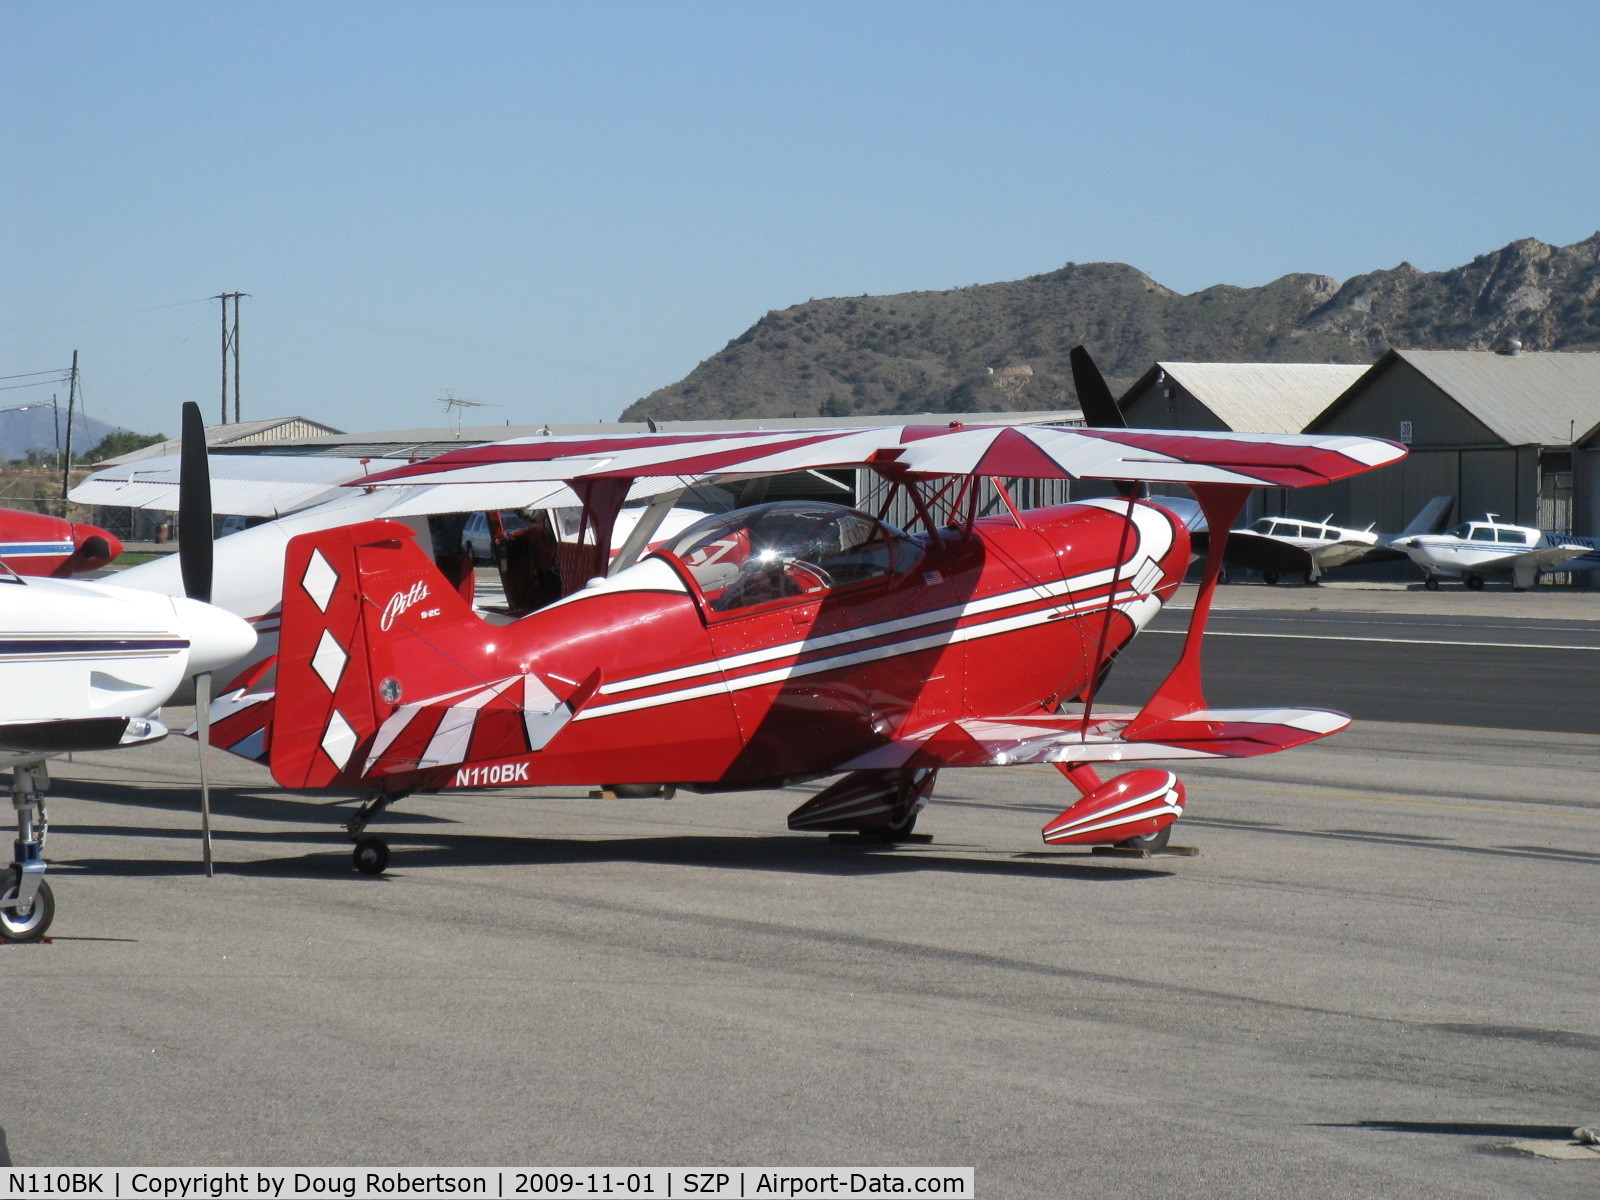 N110BK, 2007 Aviat Pitts S-2C Special C/N 6077, 2007 Aviat PITTS S-2C, Lycoming AEIO-540-D4A5 260 Hp